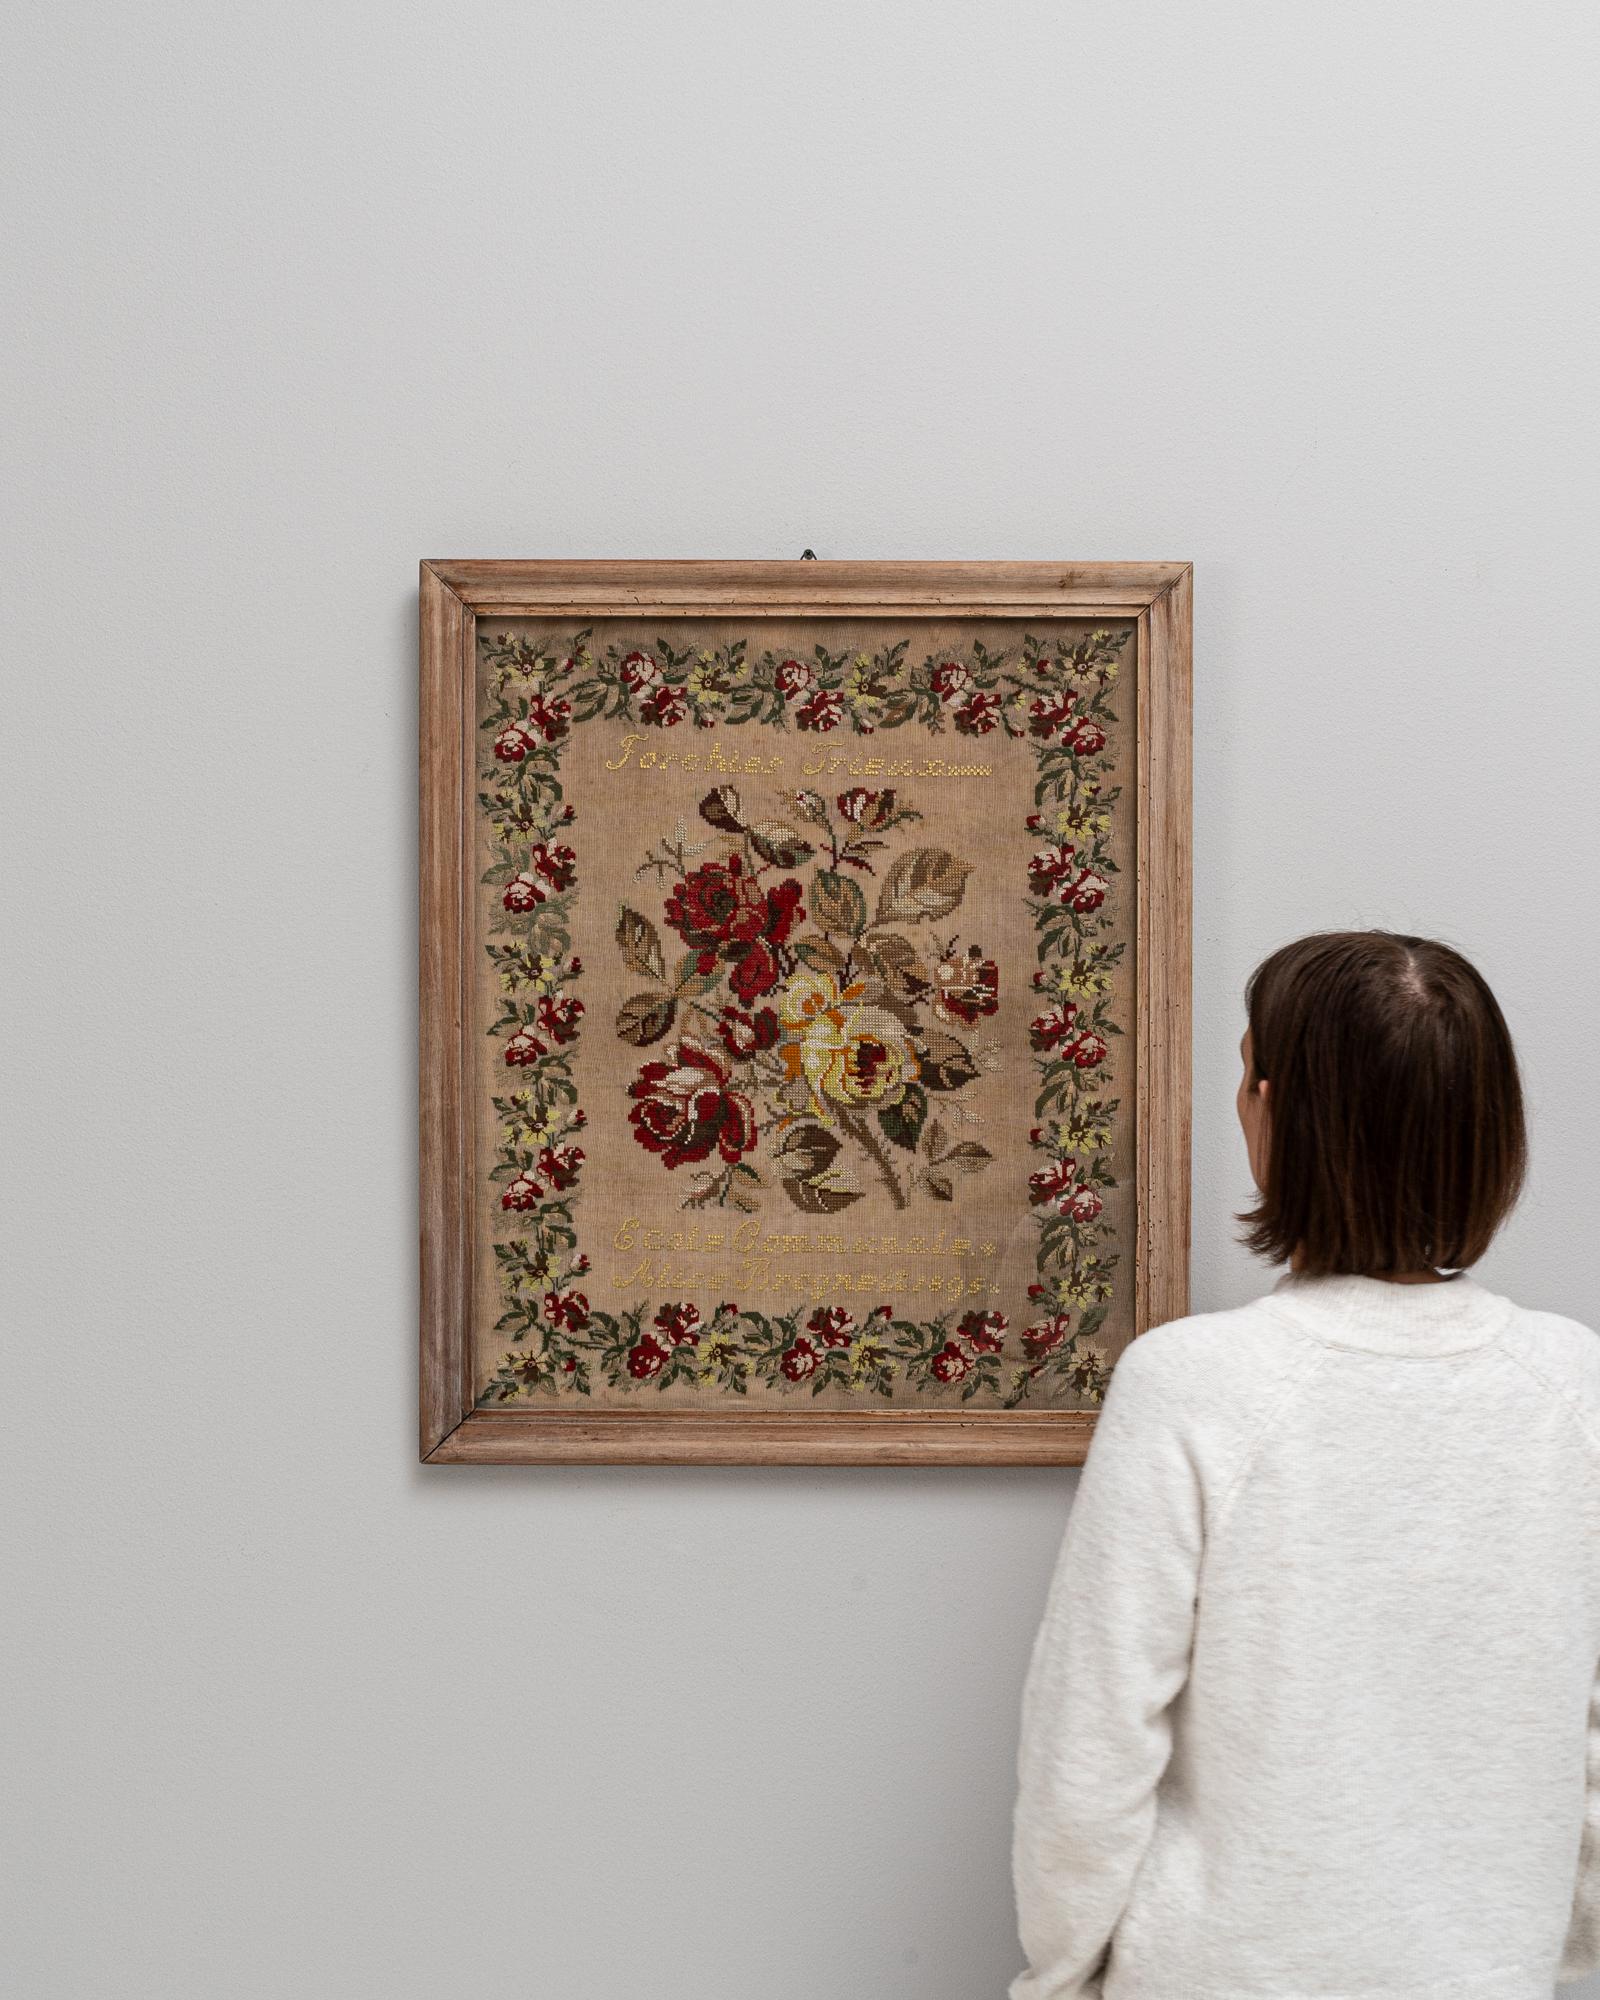 This 20th Century Belgian tapestry is a picturesque tableau of needlework artistry, beautifully framed in natural wood that echoes the warmth of the intricate stitches. It features a lush bouquet of florals, each petal and leaf meticulously